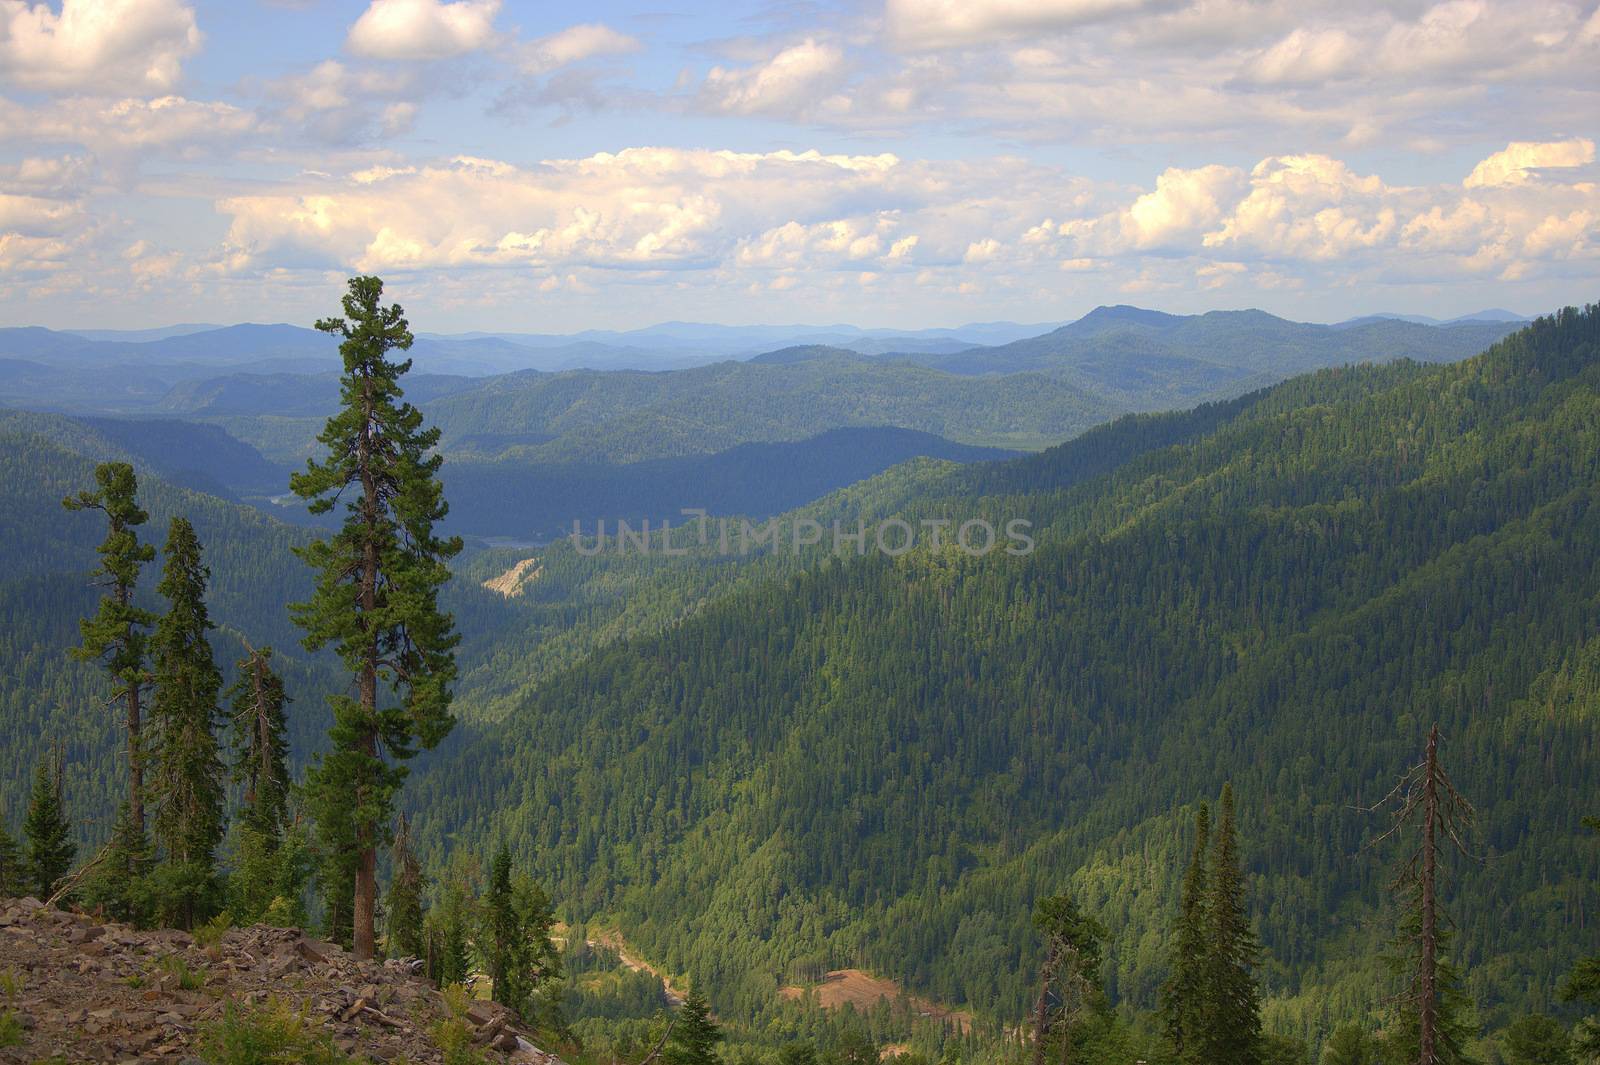 Panoramic view of mountain ranges from the top of the mountain with growing pine trees under the clouds. Altai, Siberia, Russia.